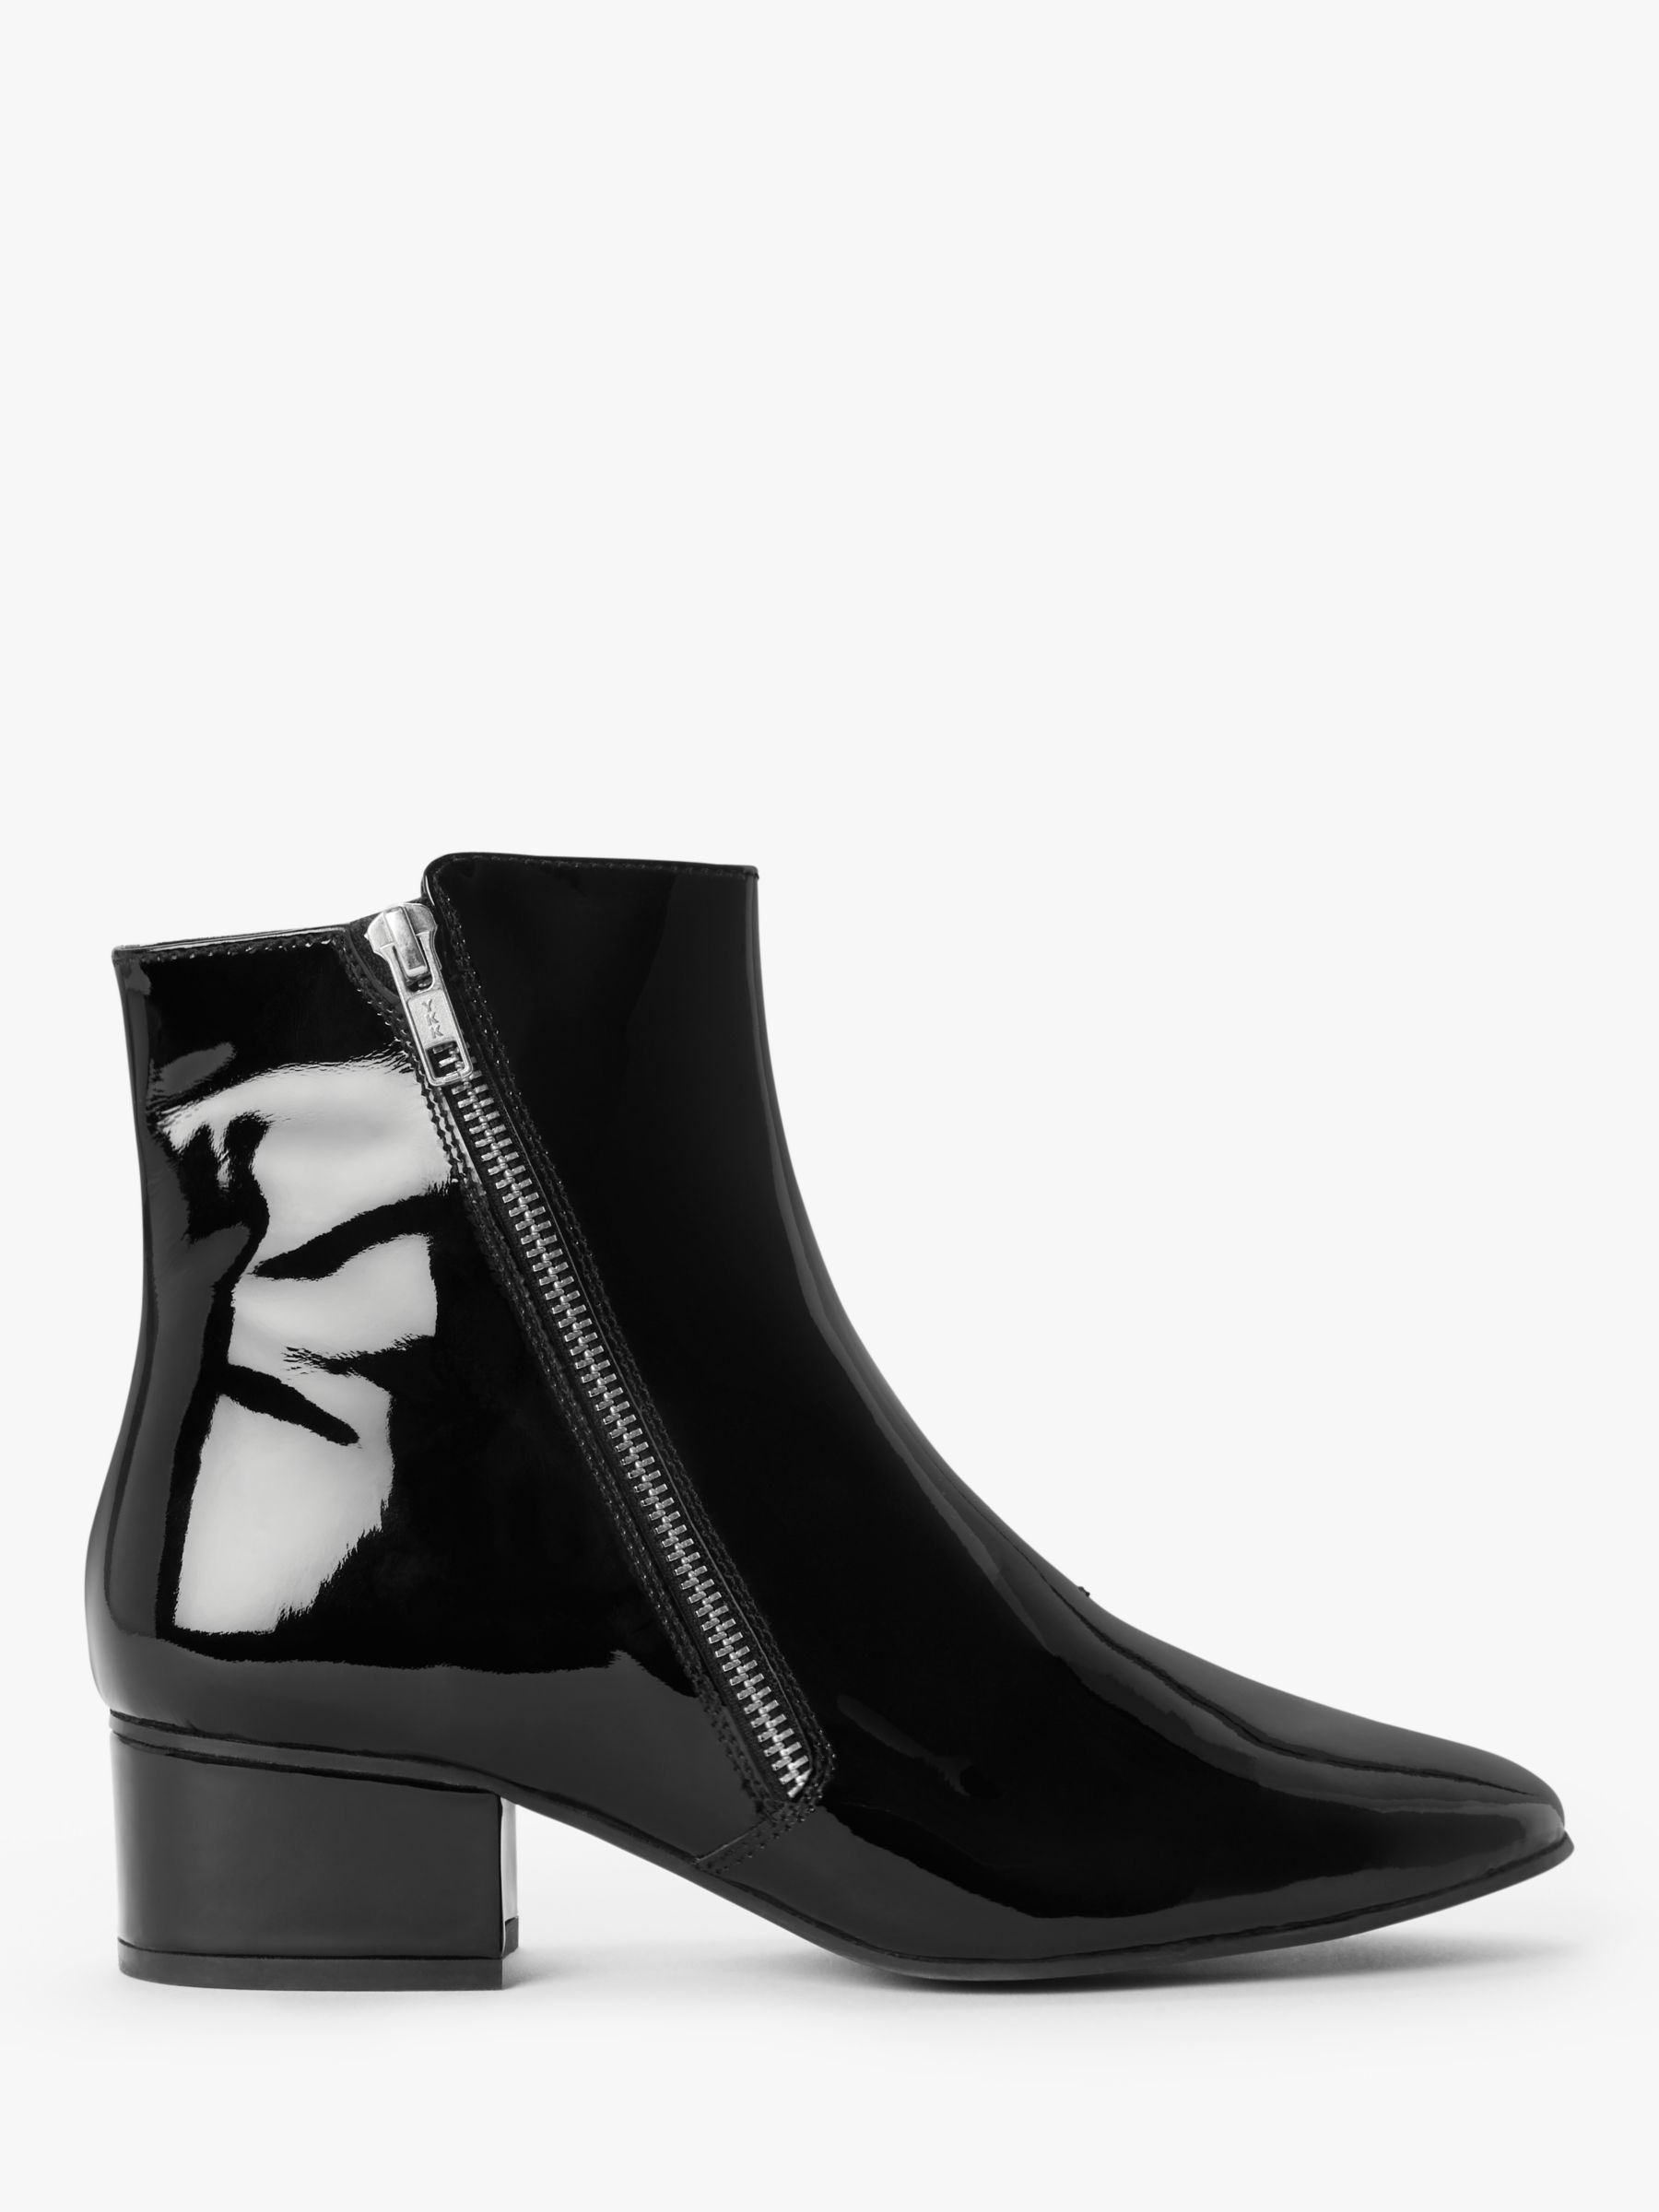 Kin Pepper Patent Leather Ankle Boots, Black